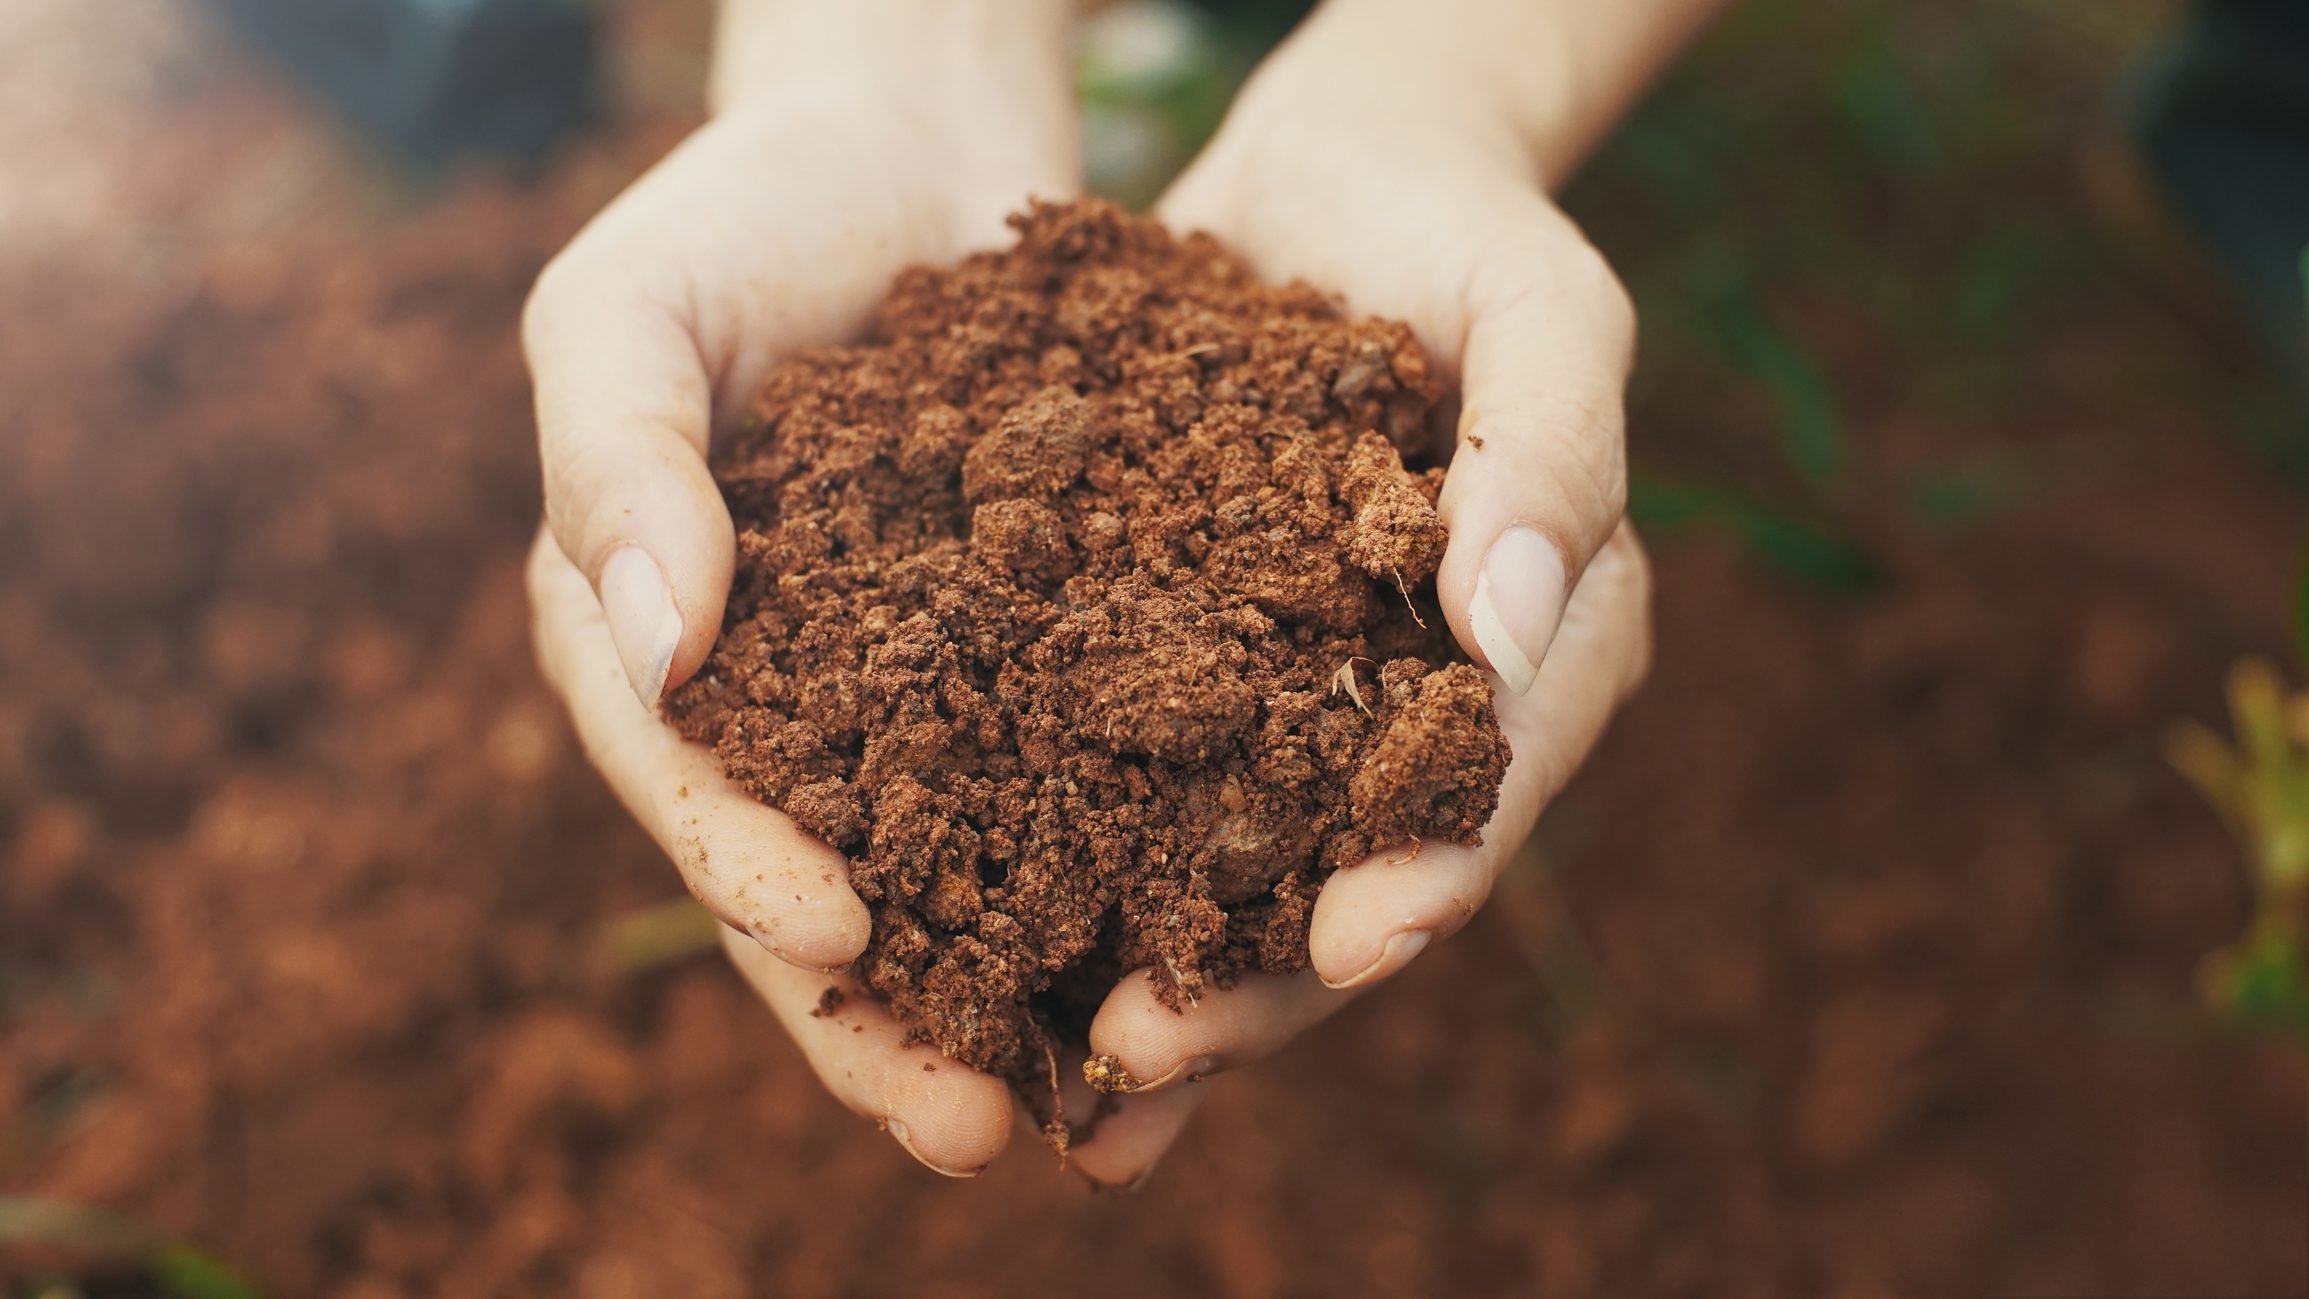 How to Test Your Soil pH and Texture at Home